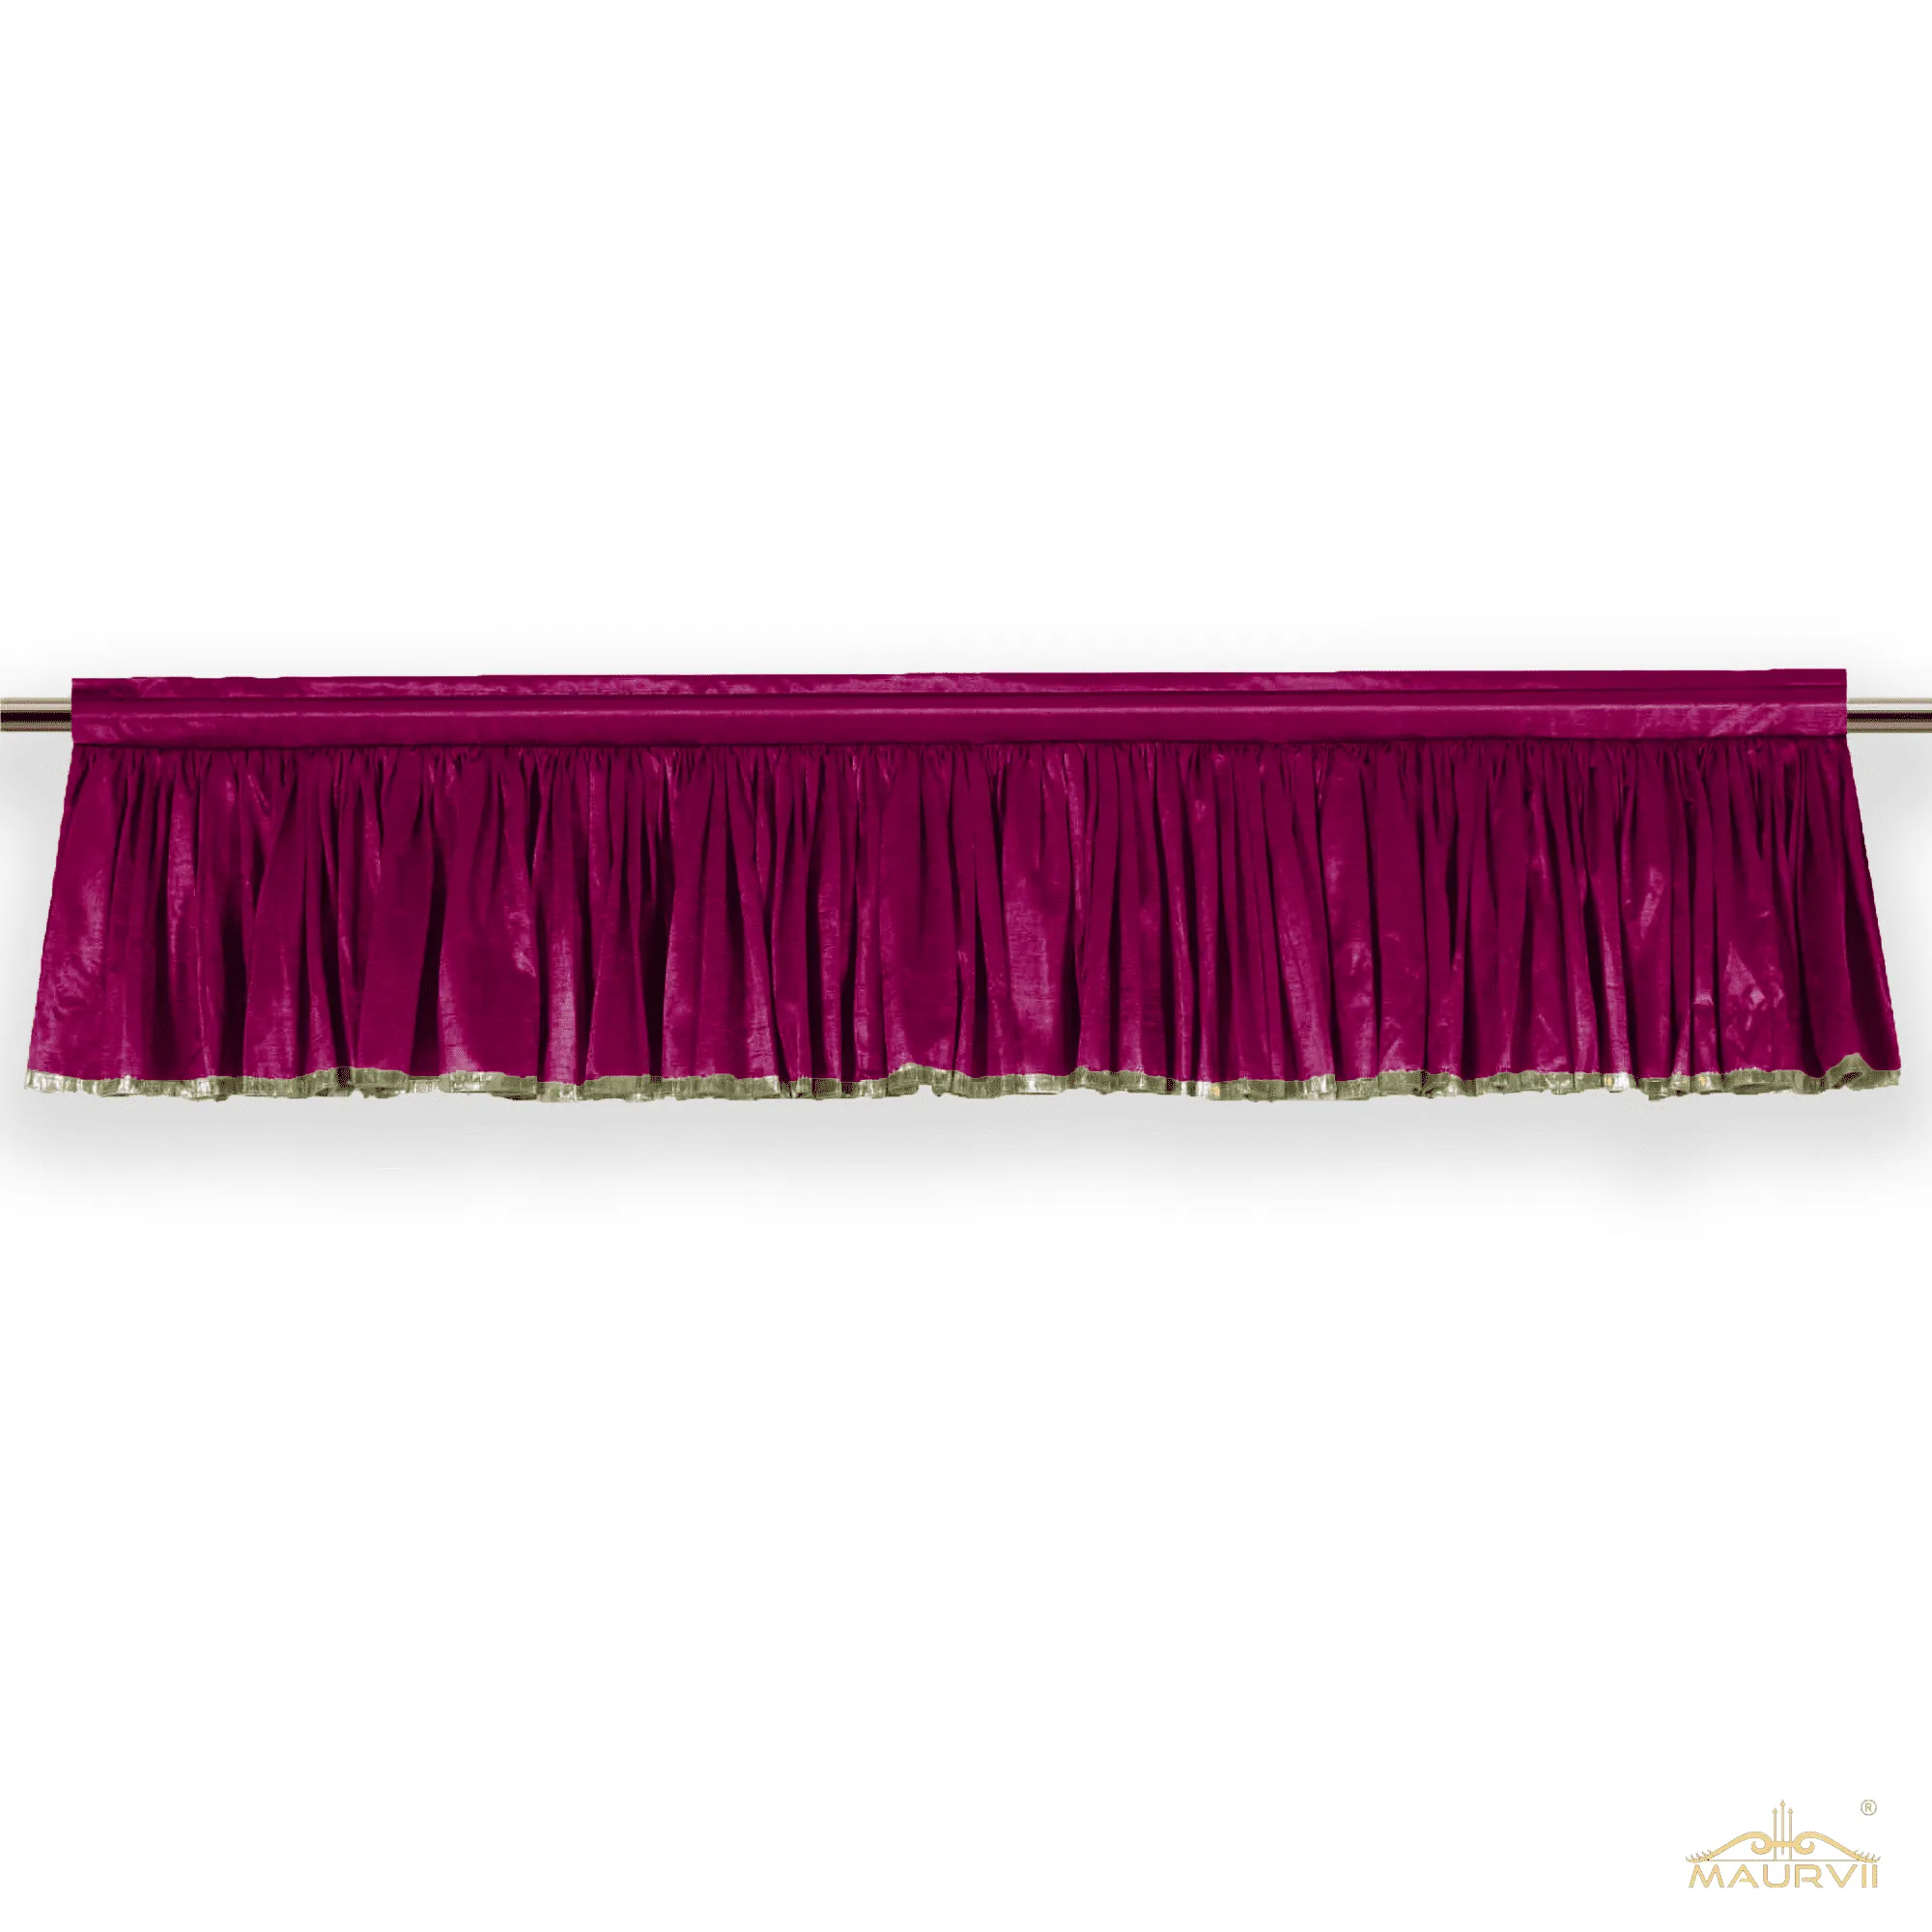 Burgundy Pleated Valance installed with curtain rod